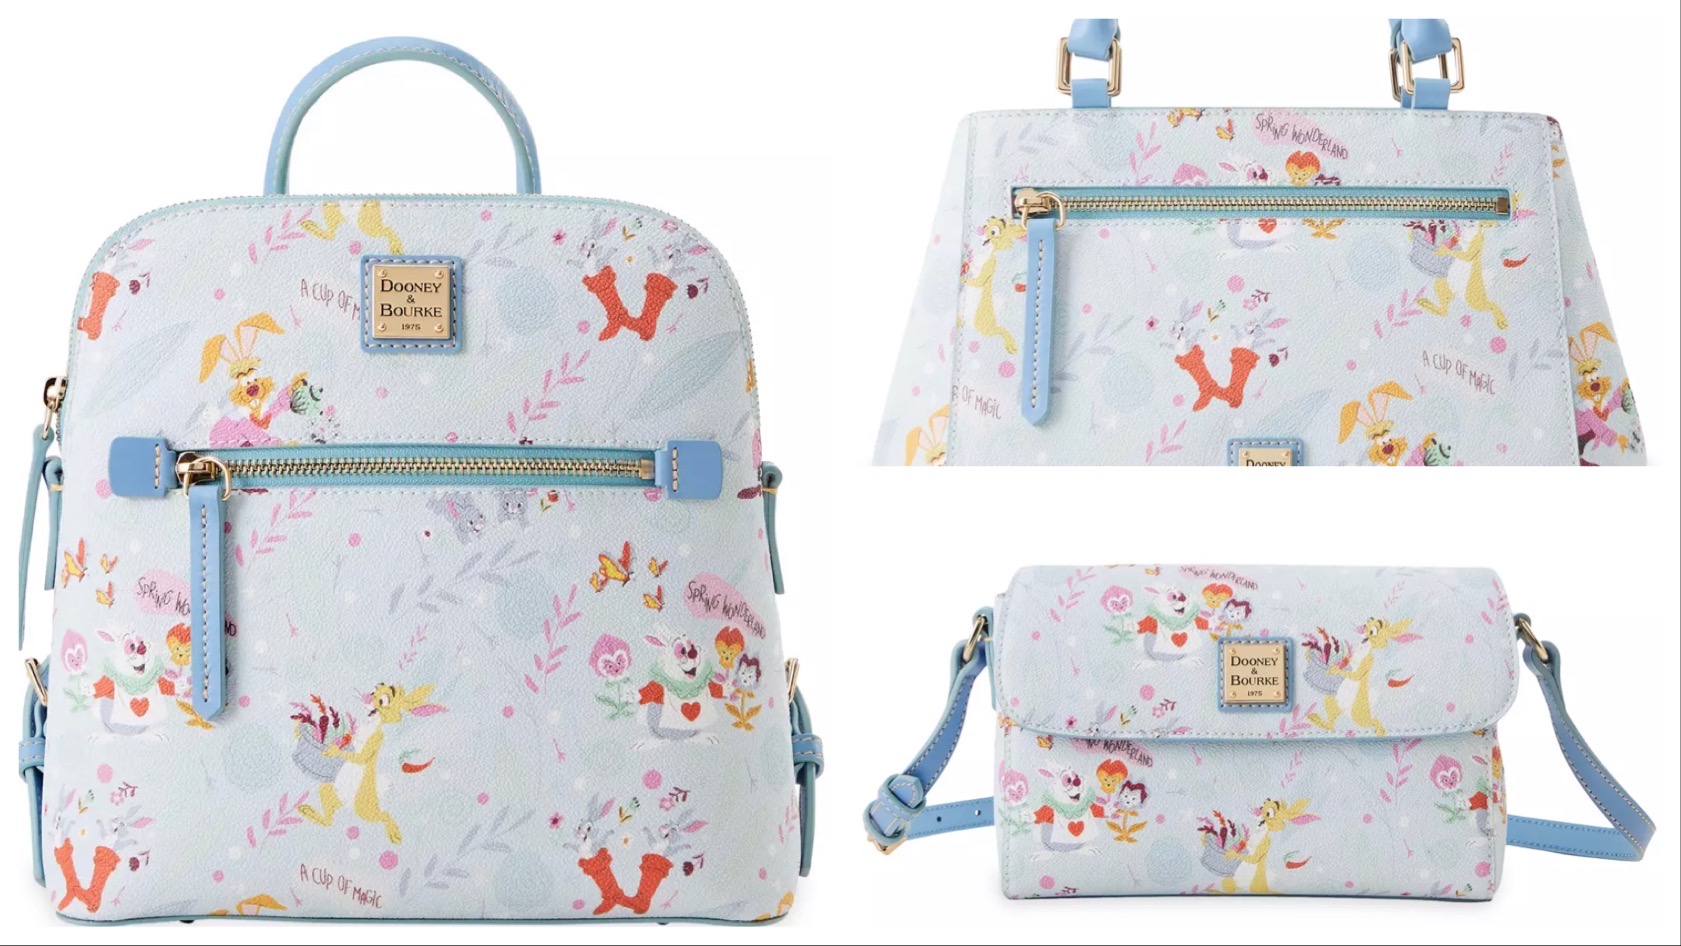 New Disney Rabbits Dooney & Bourke Collection Available Now!